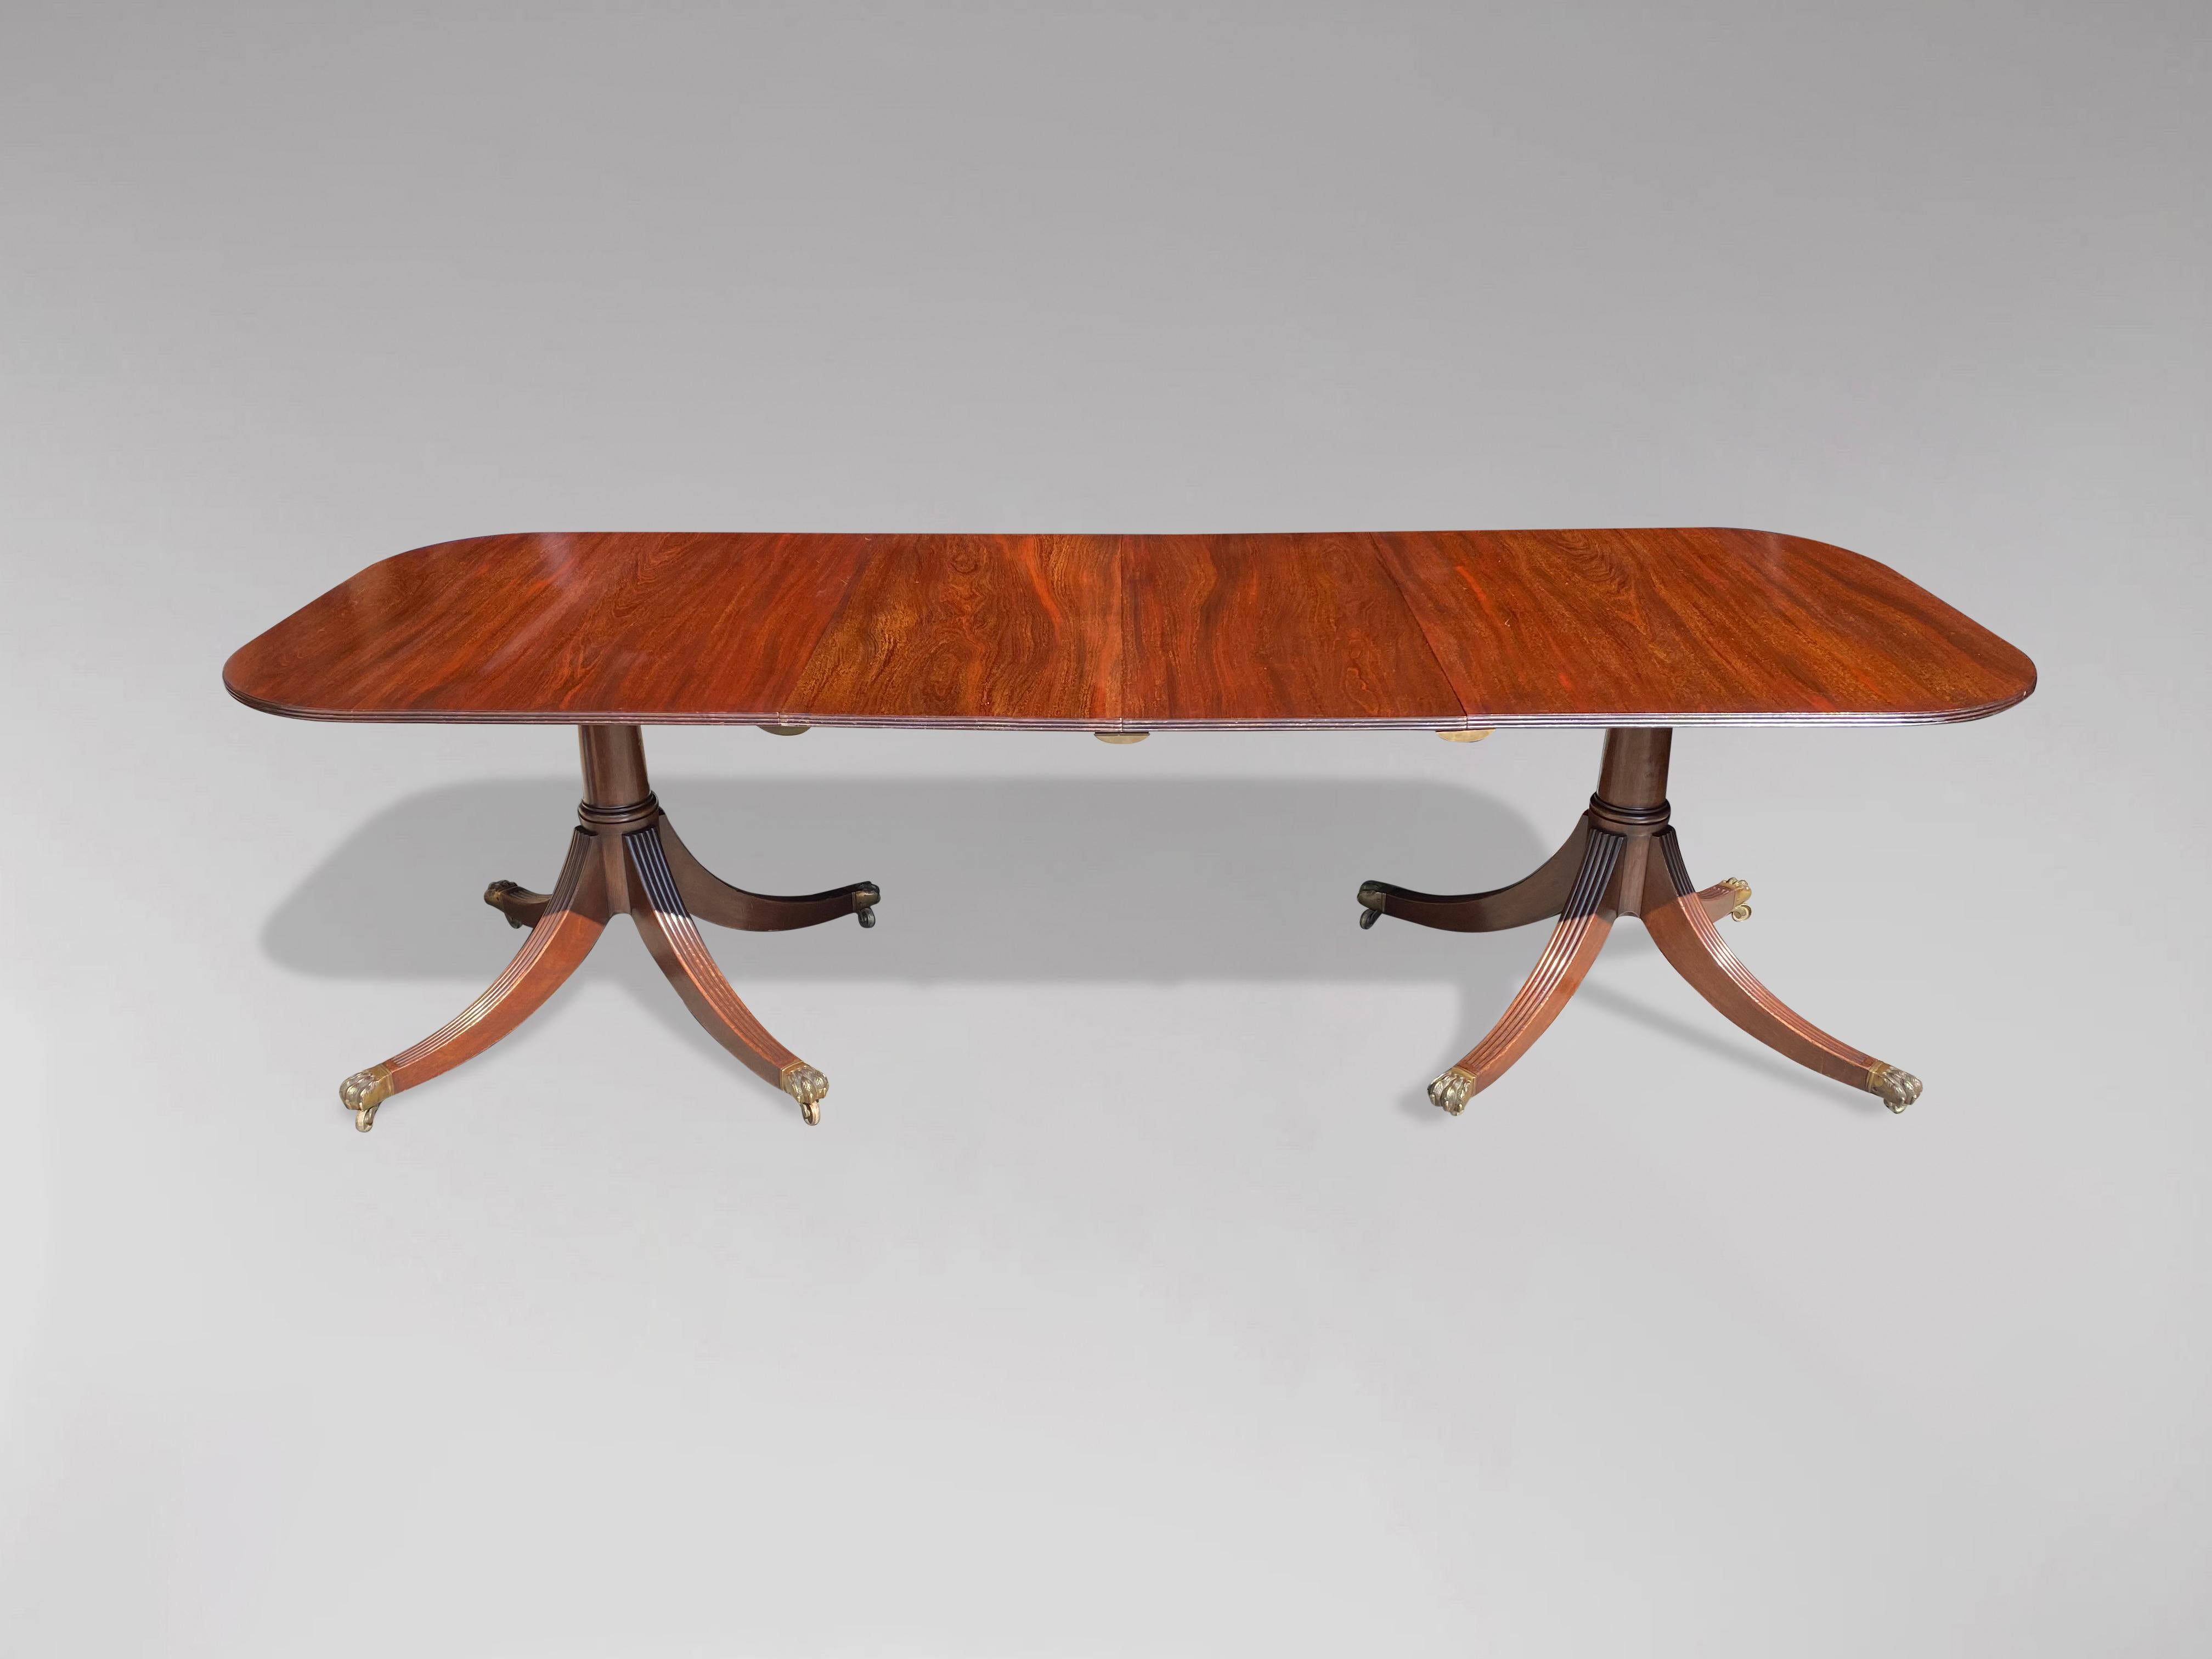 A quality early 20th century, Edwardian period solid mahogany extending dining table, with solid rounded rectangular mahogany top with reeded edge. Standing on beautiful gun barrel turned pillars with four out swept sabre reeded legs terminating in